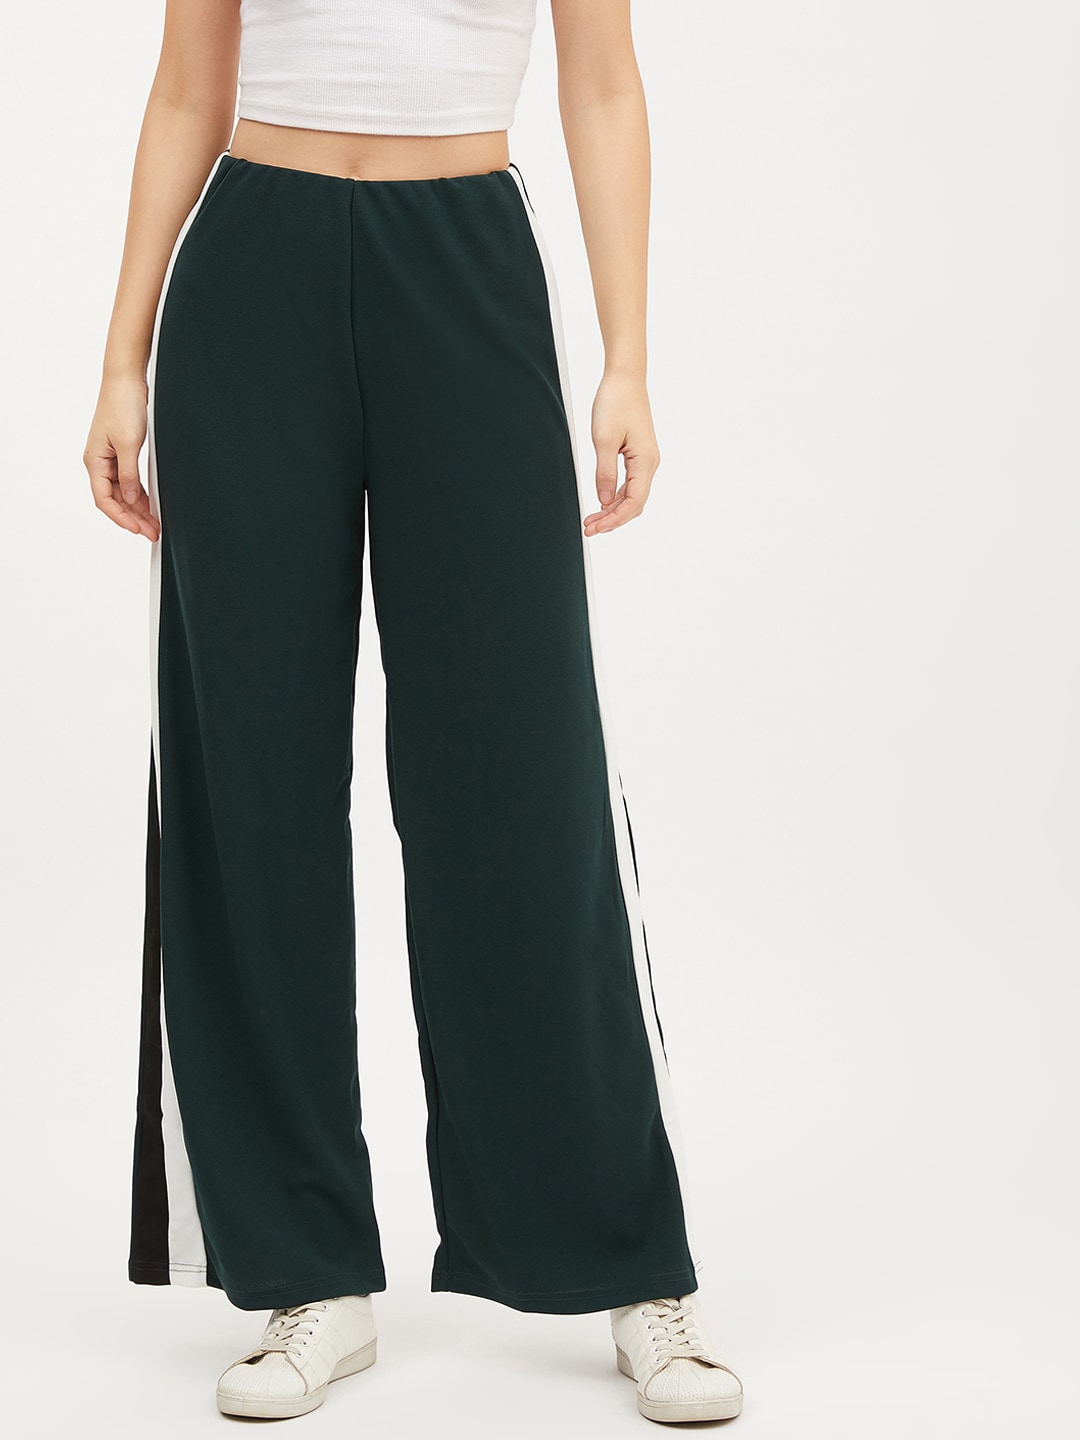 Harpa Women Green & White Smart Regular Fit Striped Parallel Trousers Price in India